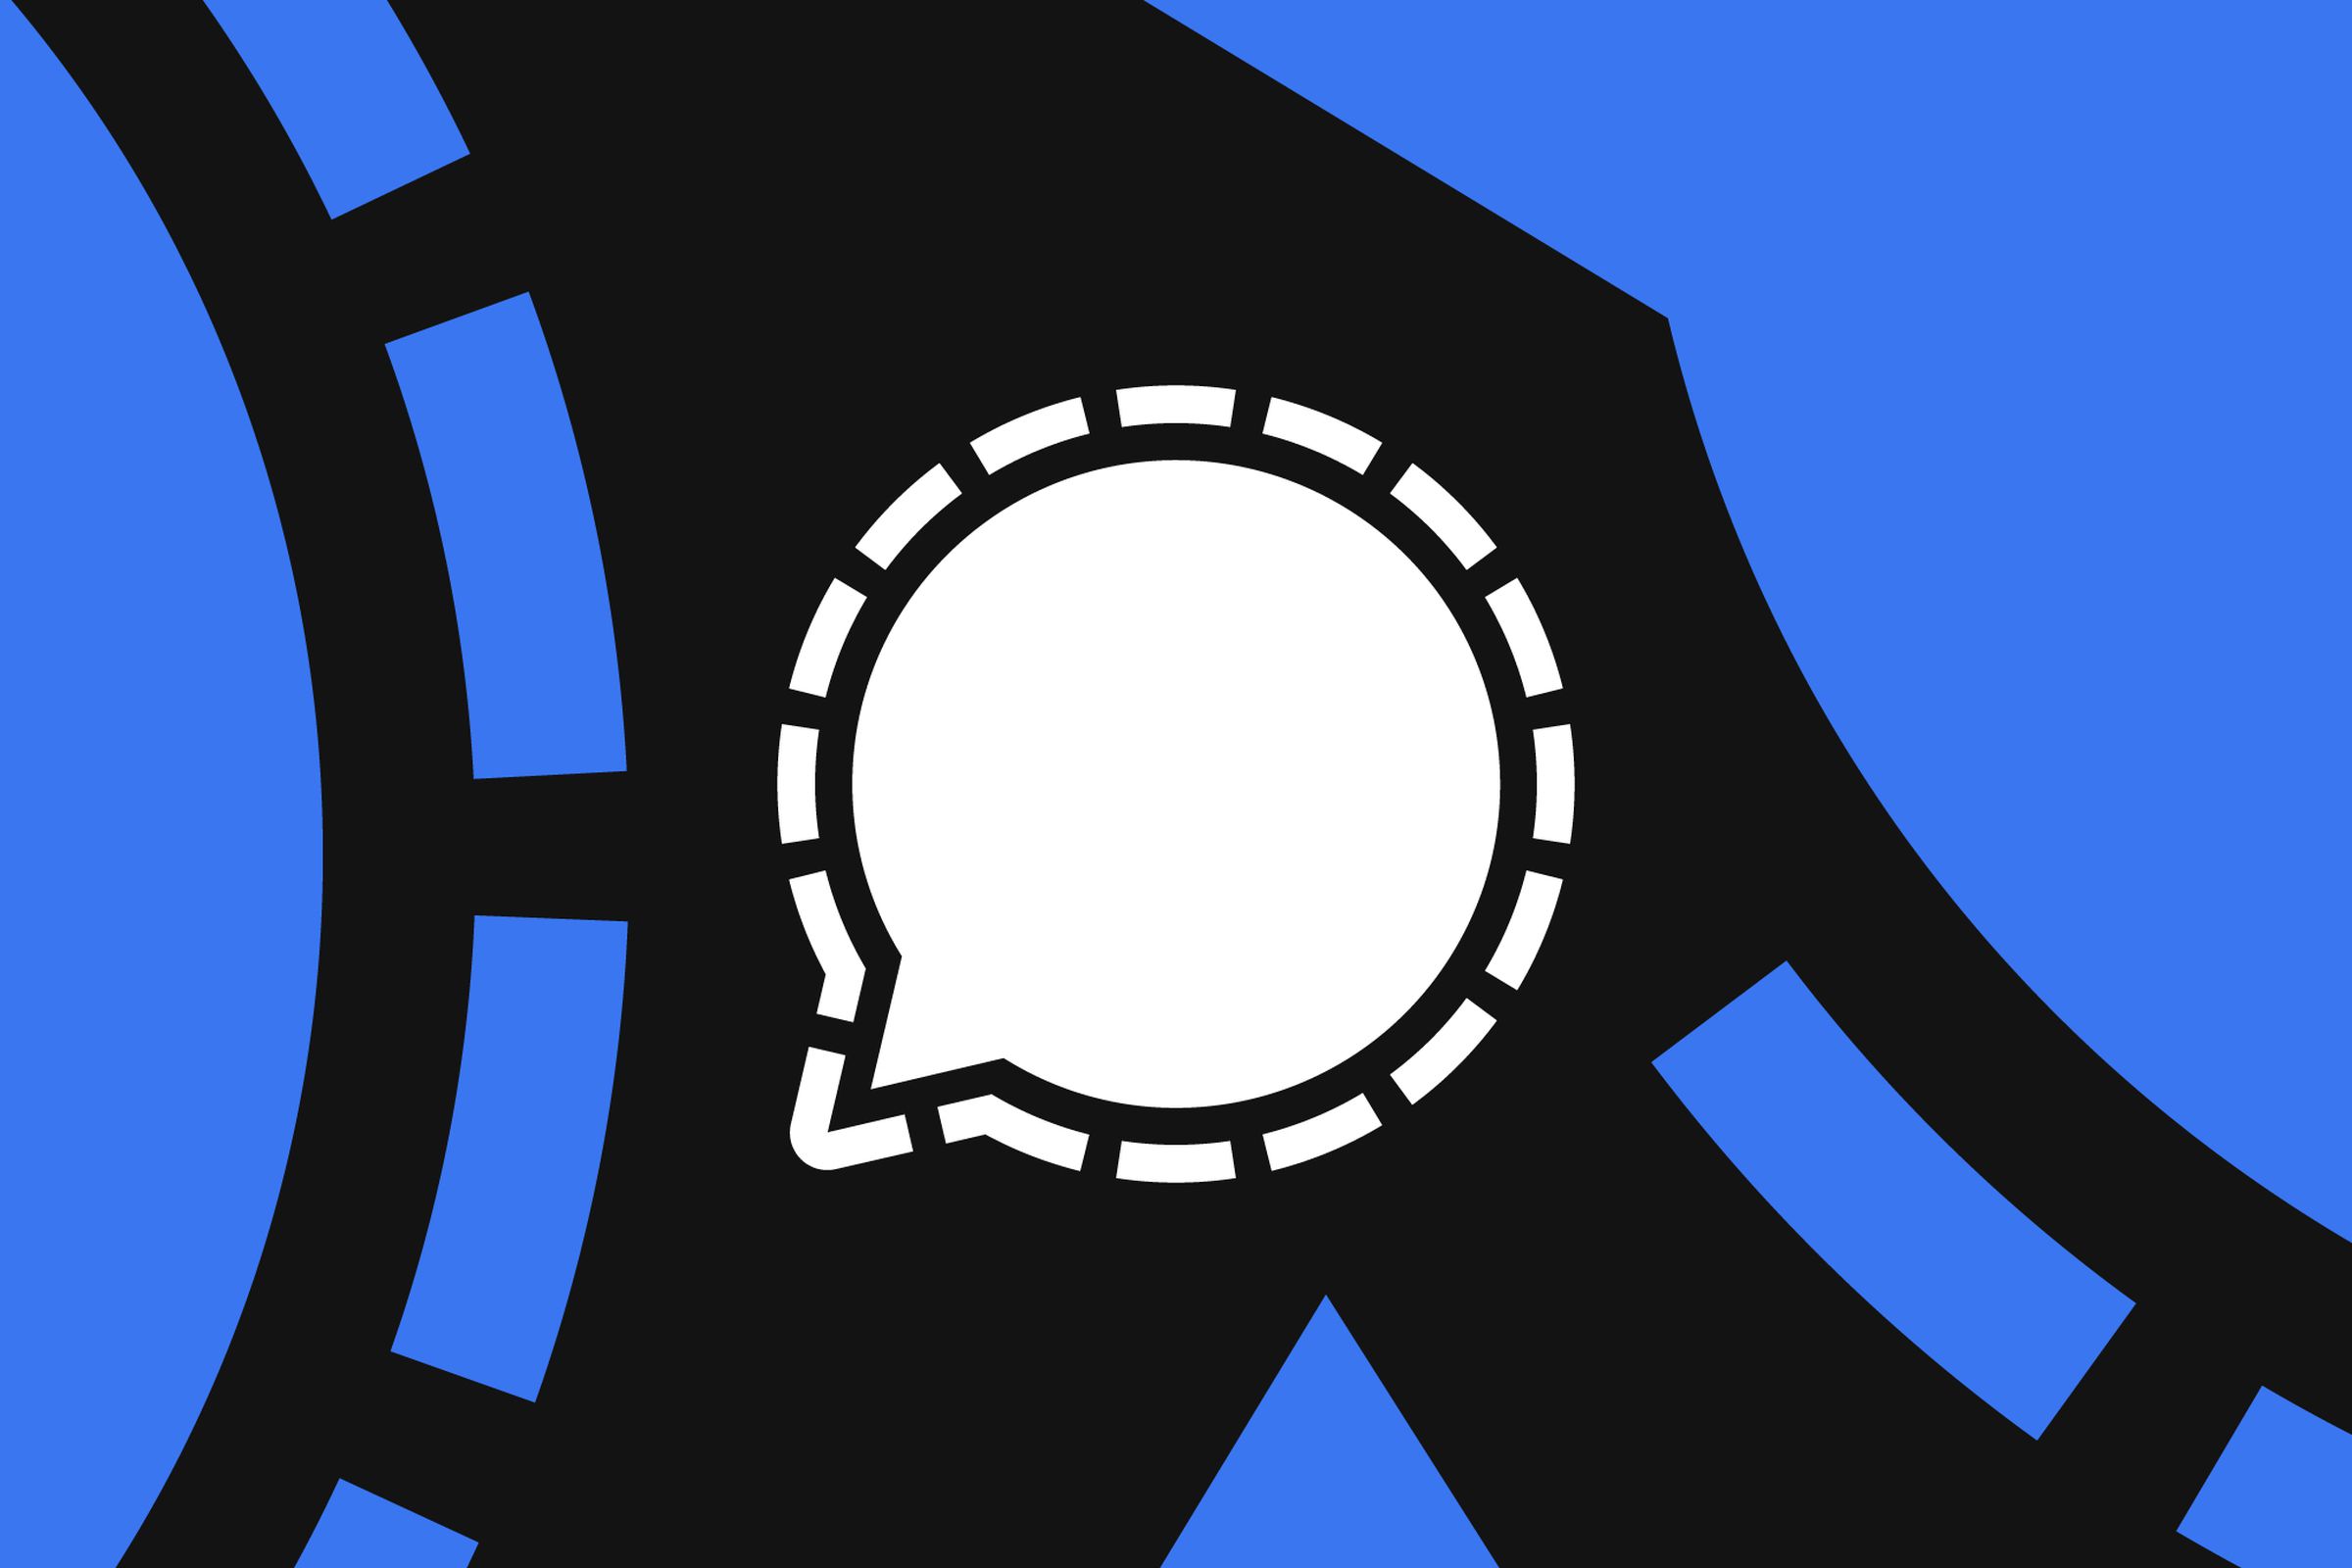 Illustration of the Signal logo, a white speech balloon with a dotted outline, on a black and blue background.